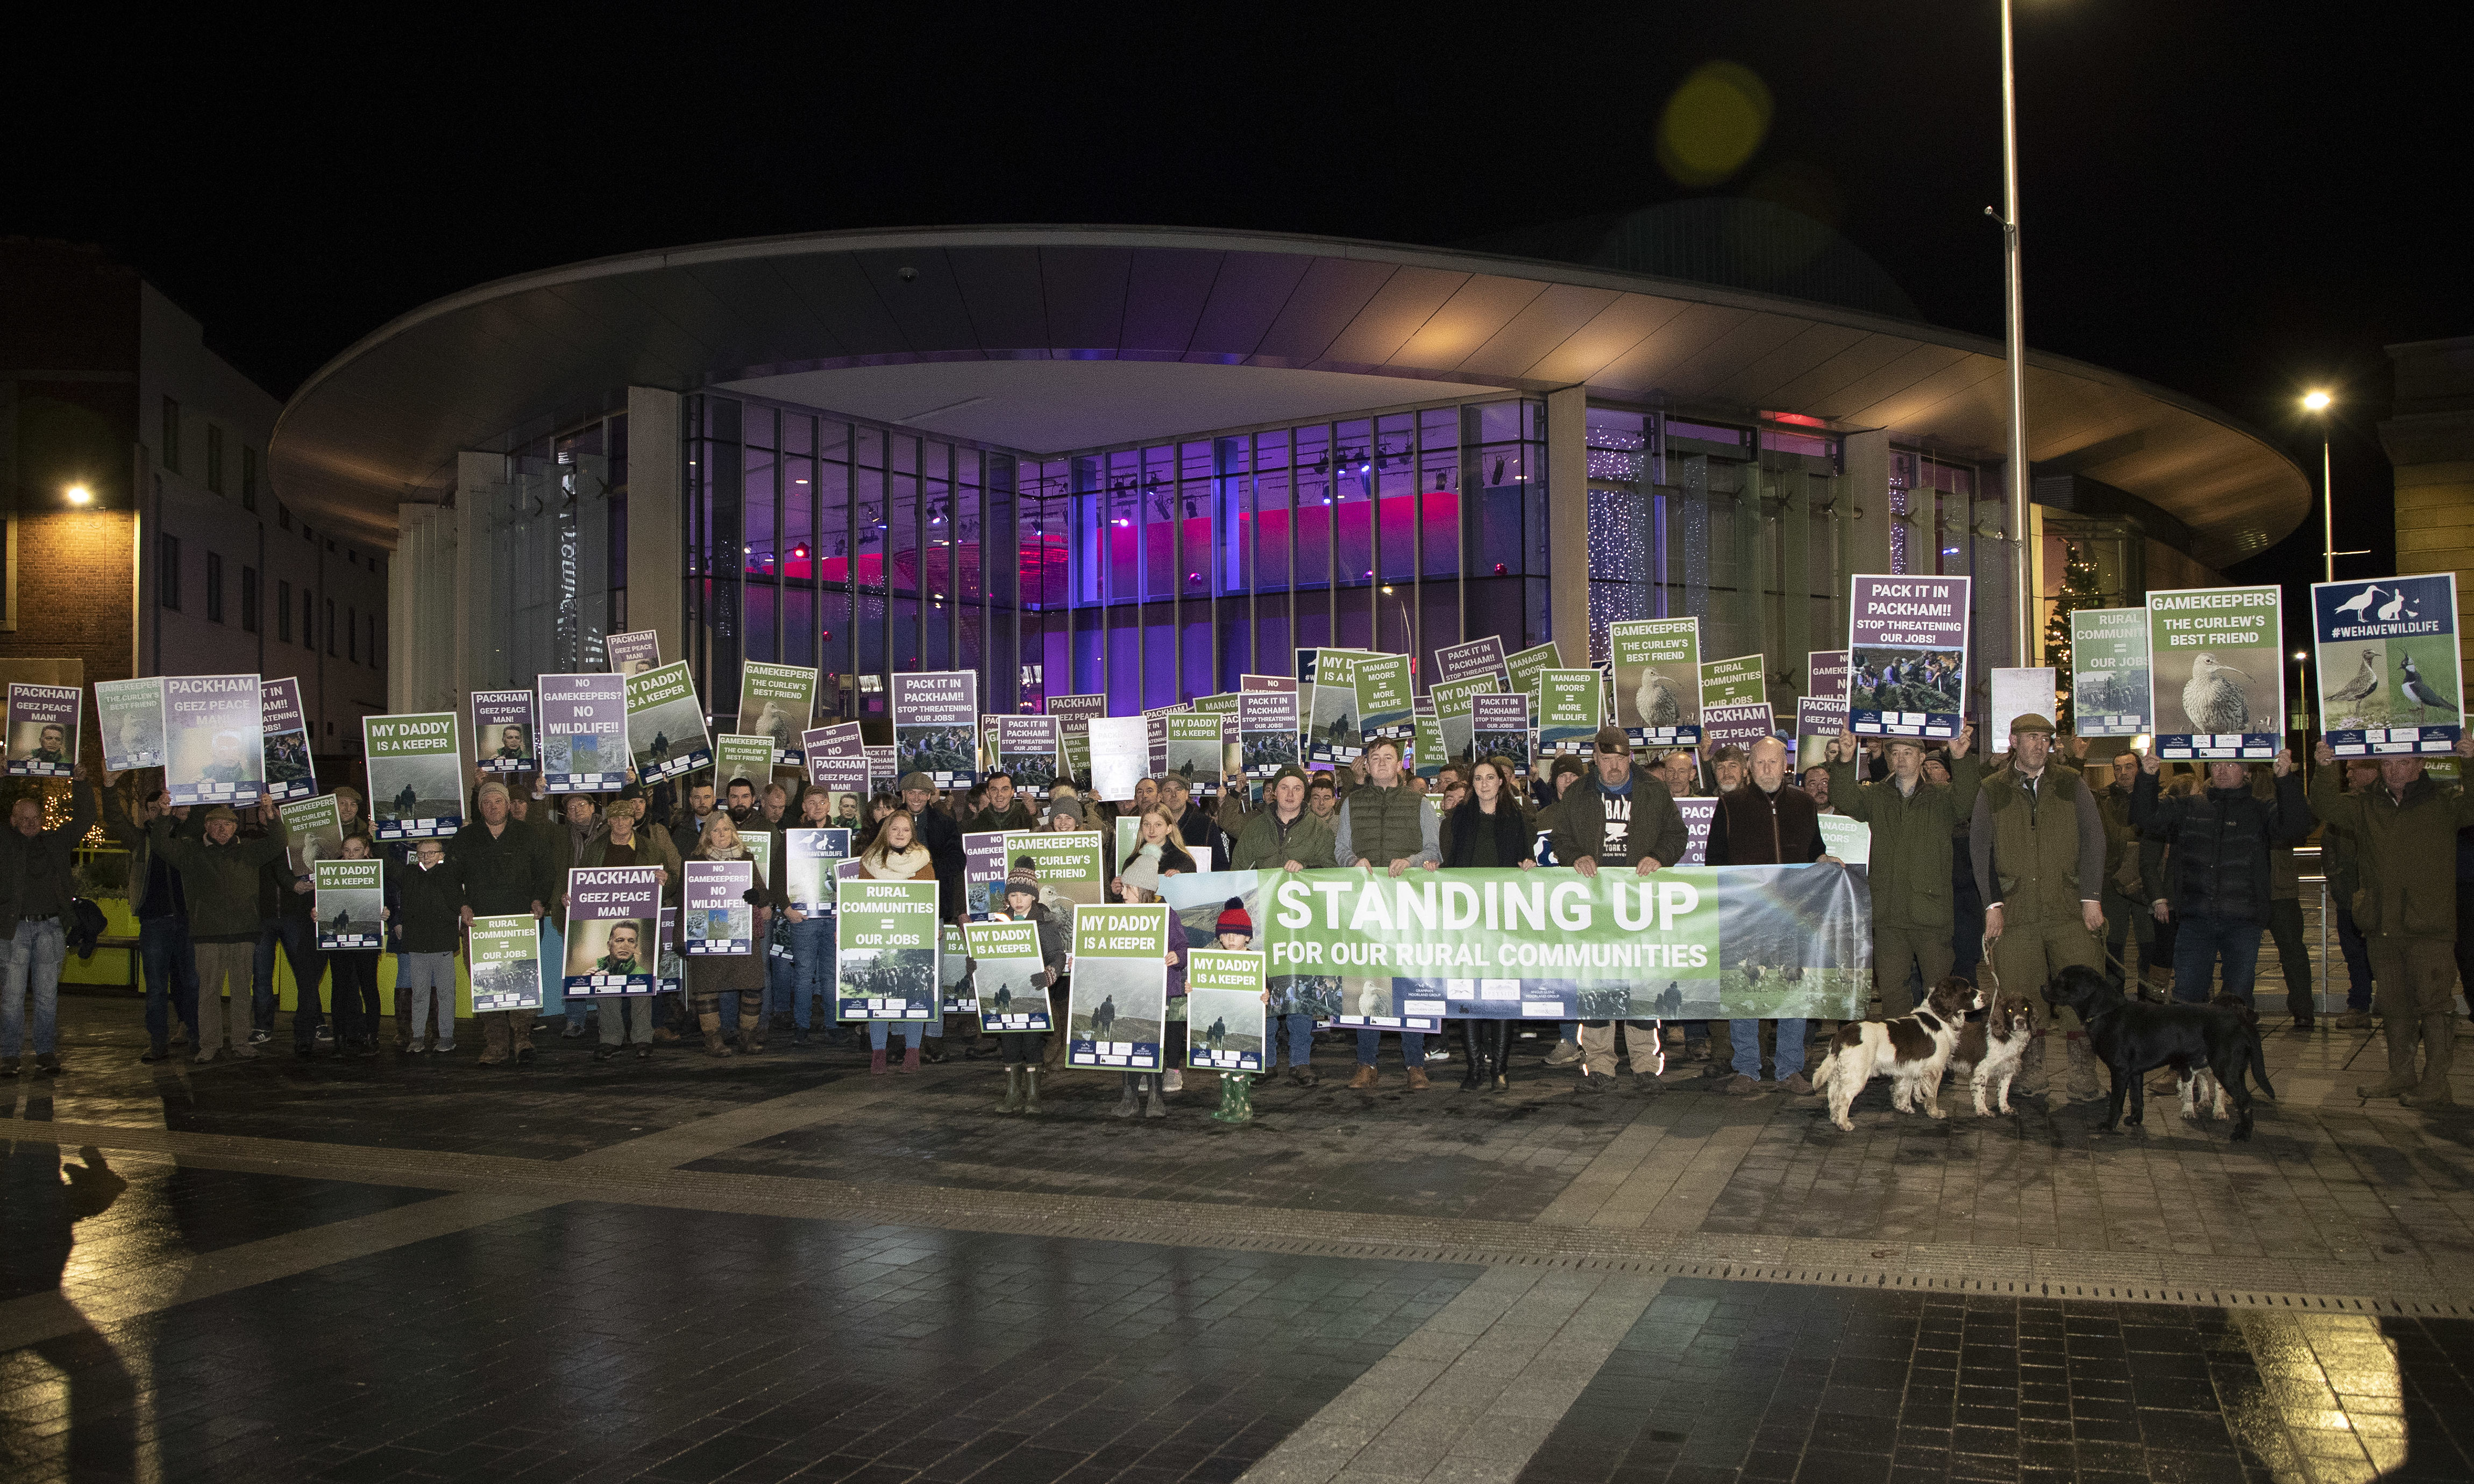 Rural workers and their families gather at Perth Concert Hall to protest against Chris Packham, who was speaking at the venue.